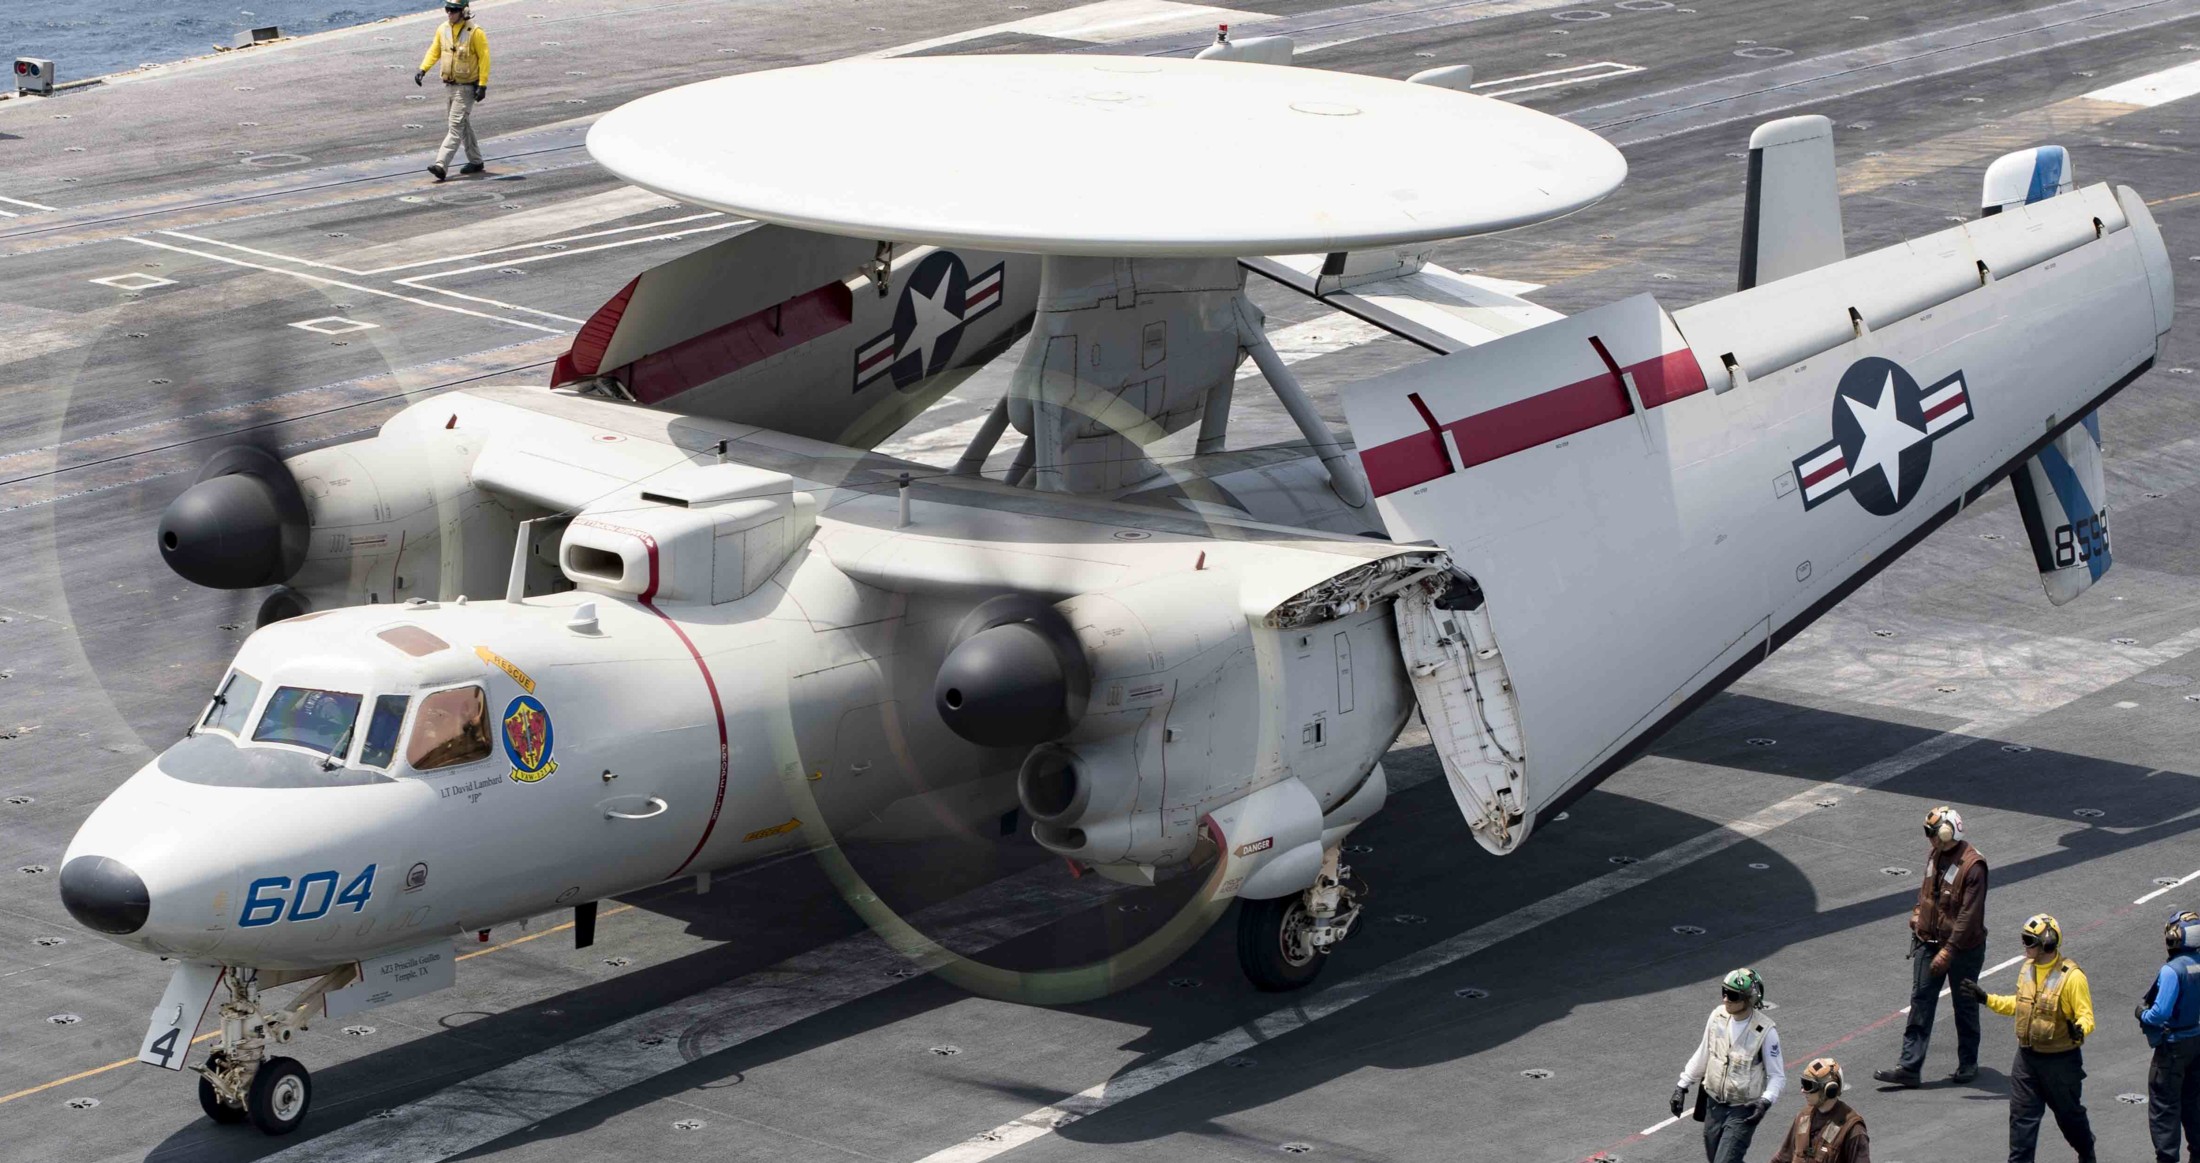 vaw-121 bluetails airborne command and control squadron us navy e-2d advanced hawkeye cvw-7 uss abraham lincoln cvn-72 76